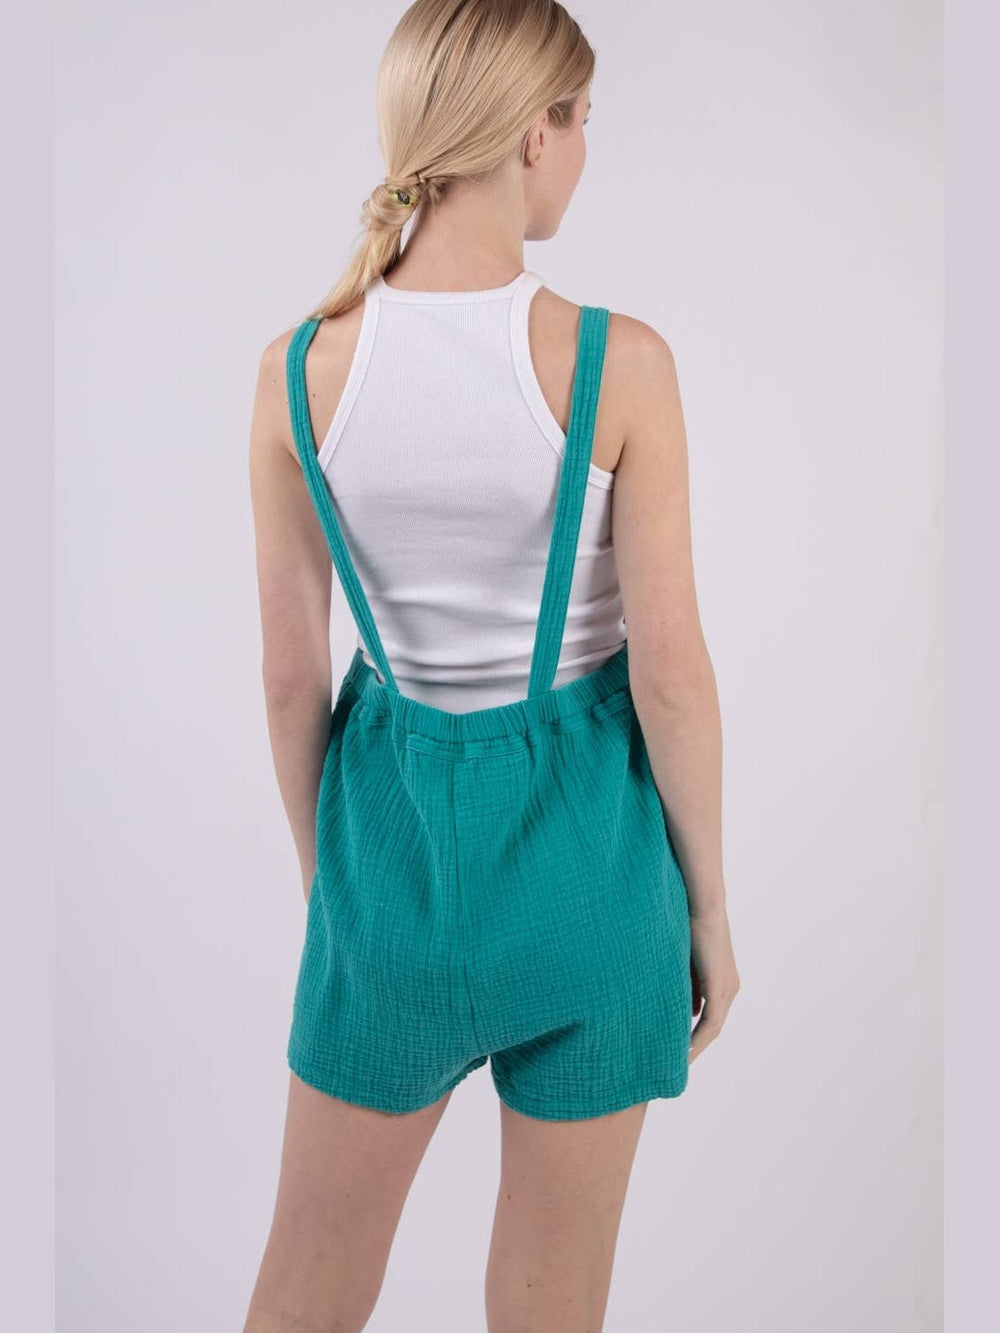 Mineral Washed Teal Double Gauze Overall Romper - Lolo Viv Boutique